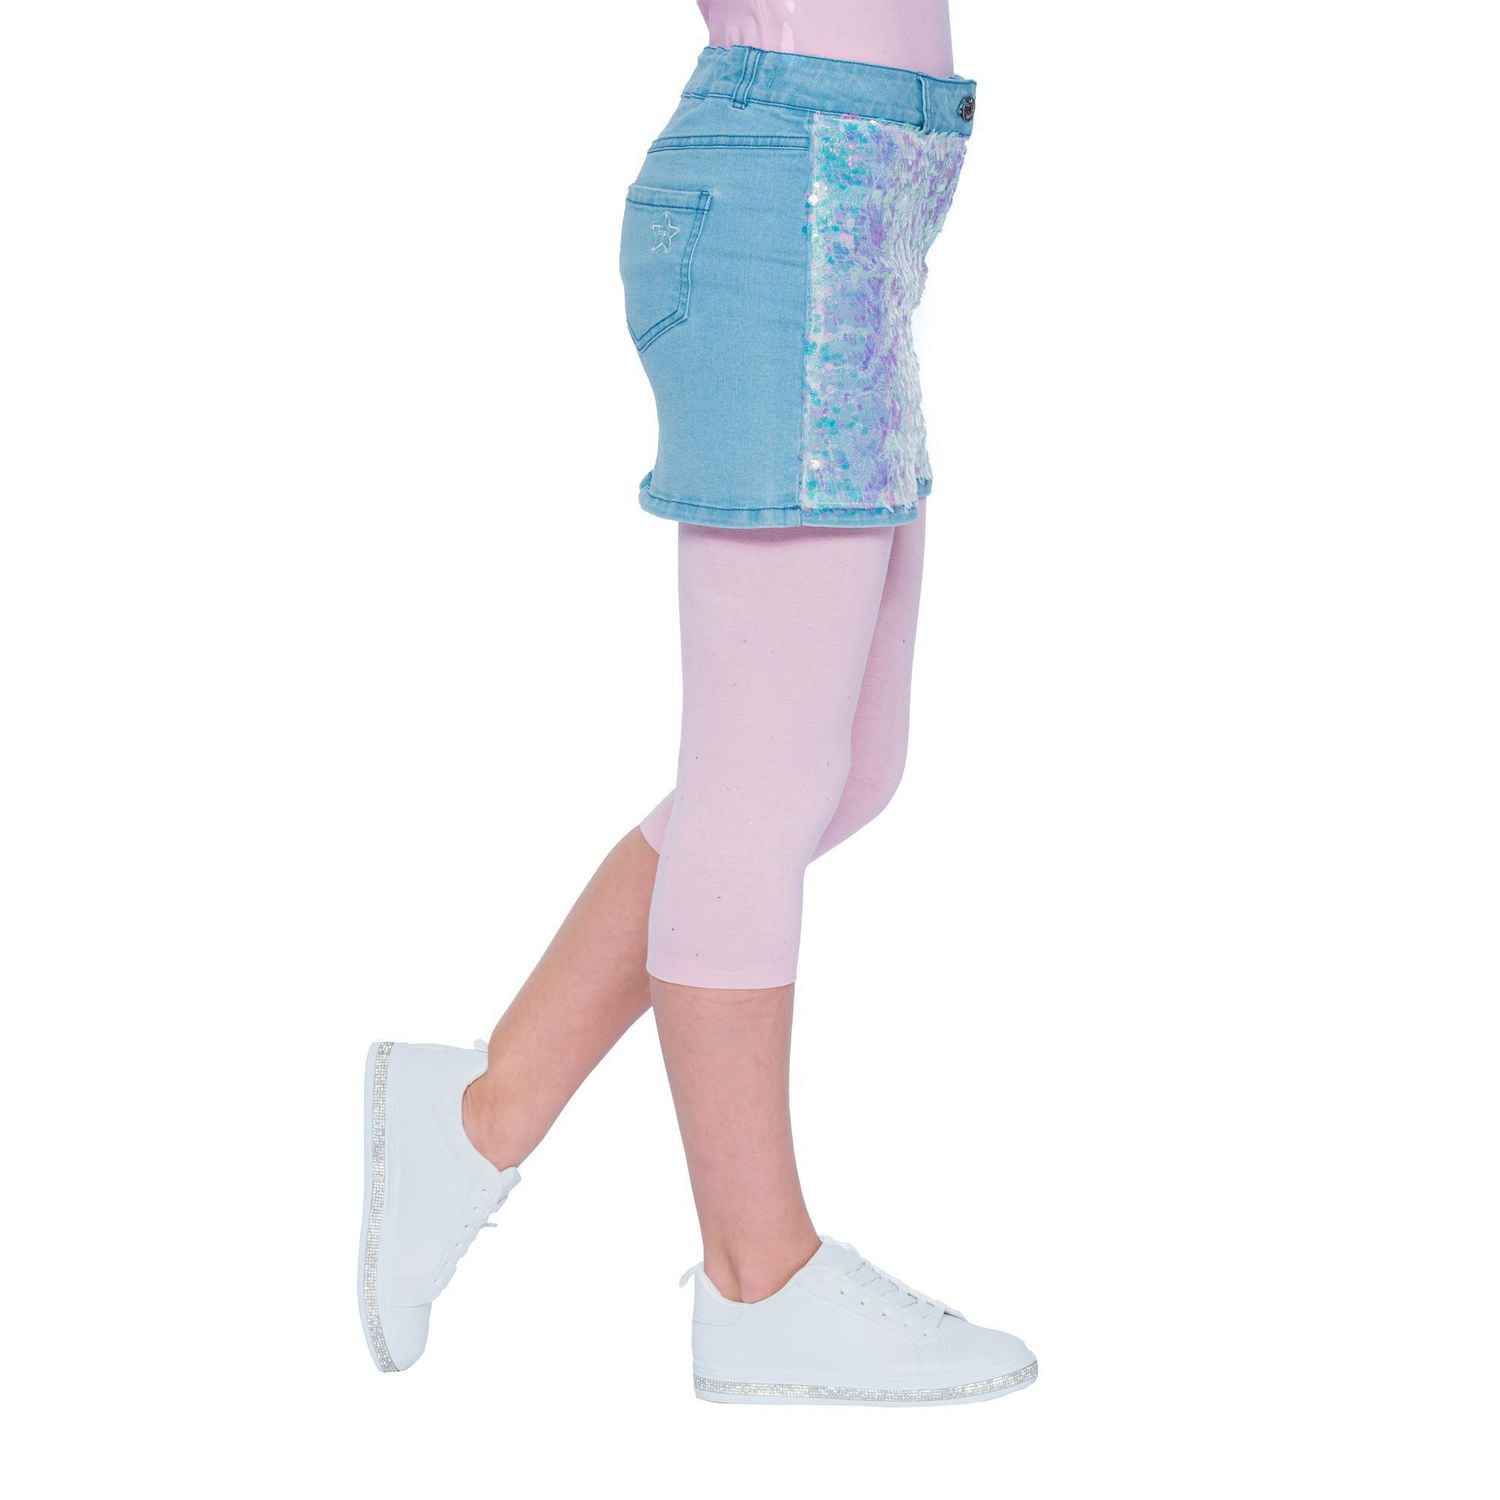 Unbranded Girls Short Leggings Pink, Shop Today. Get it Tomorrow!